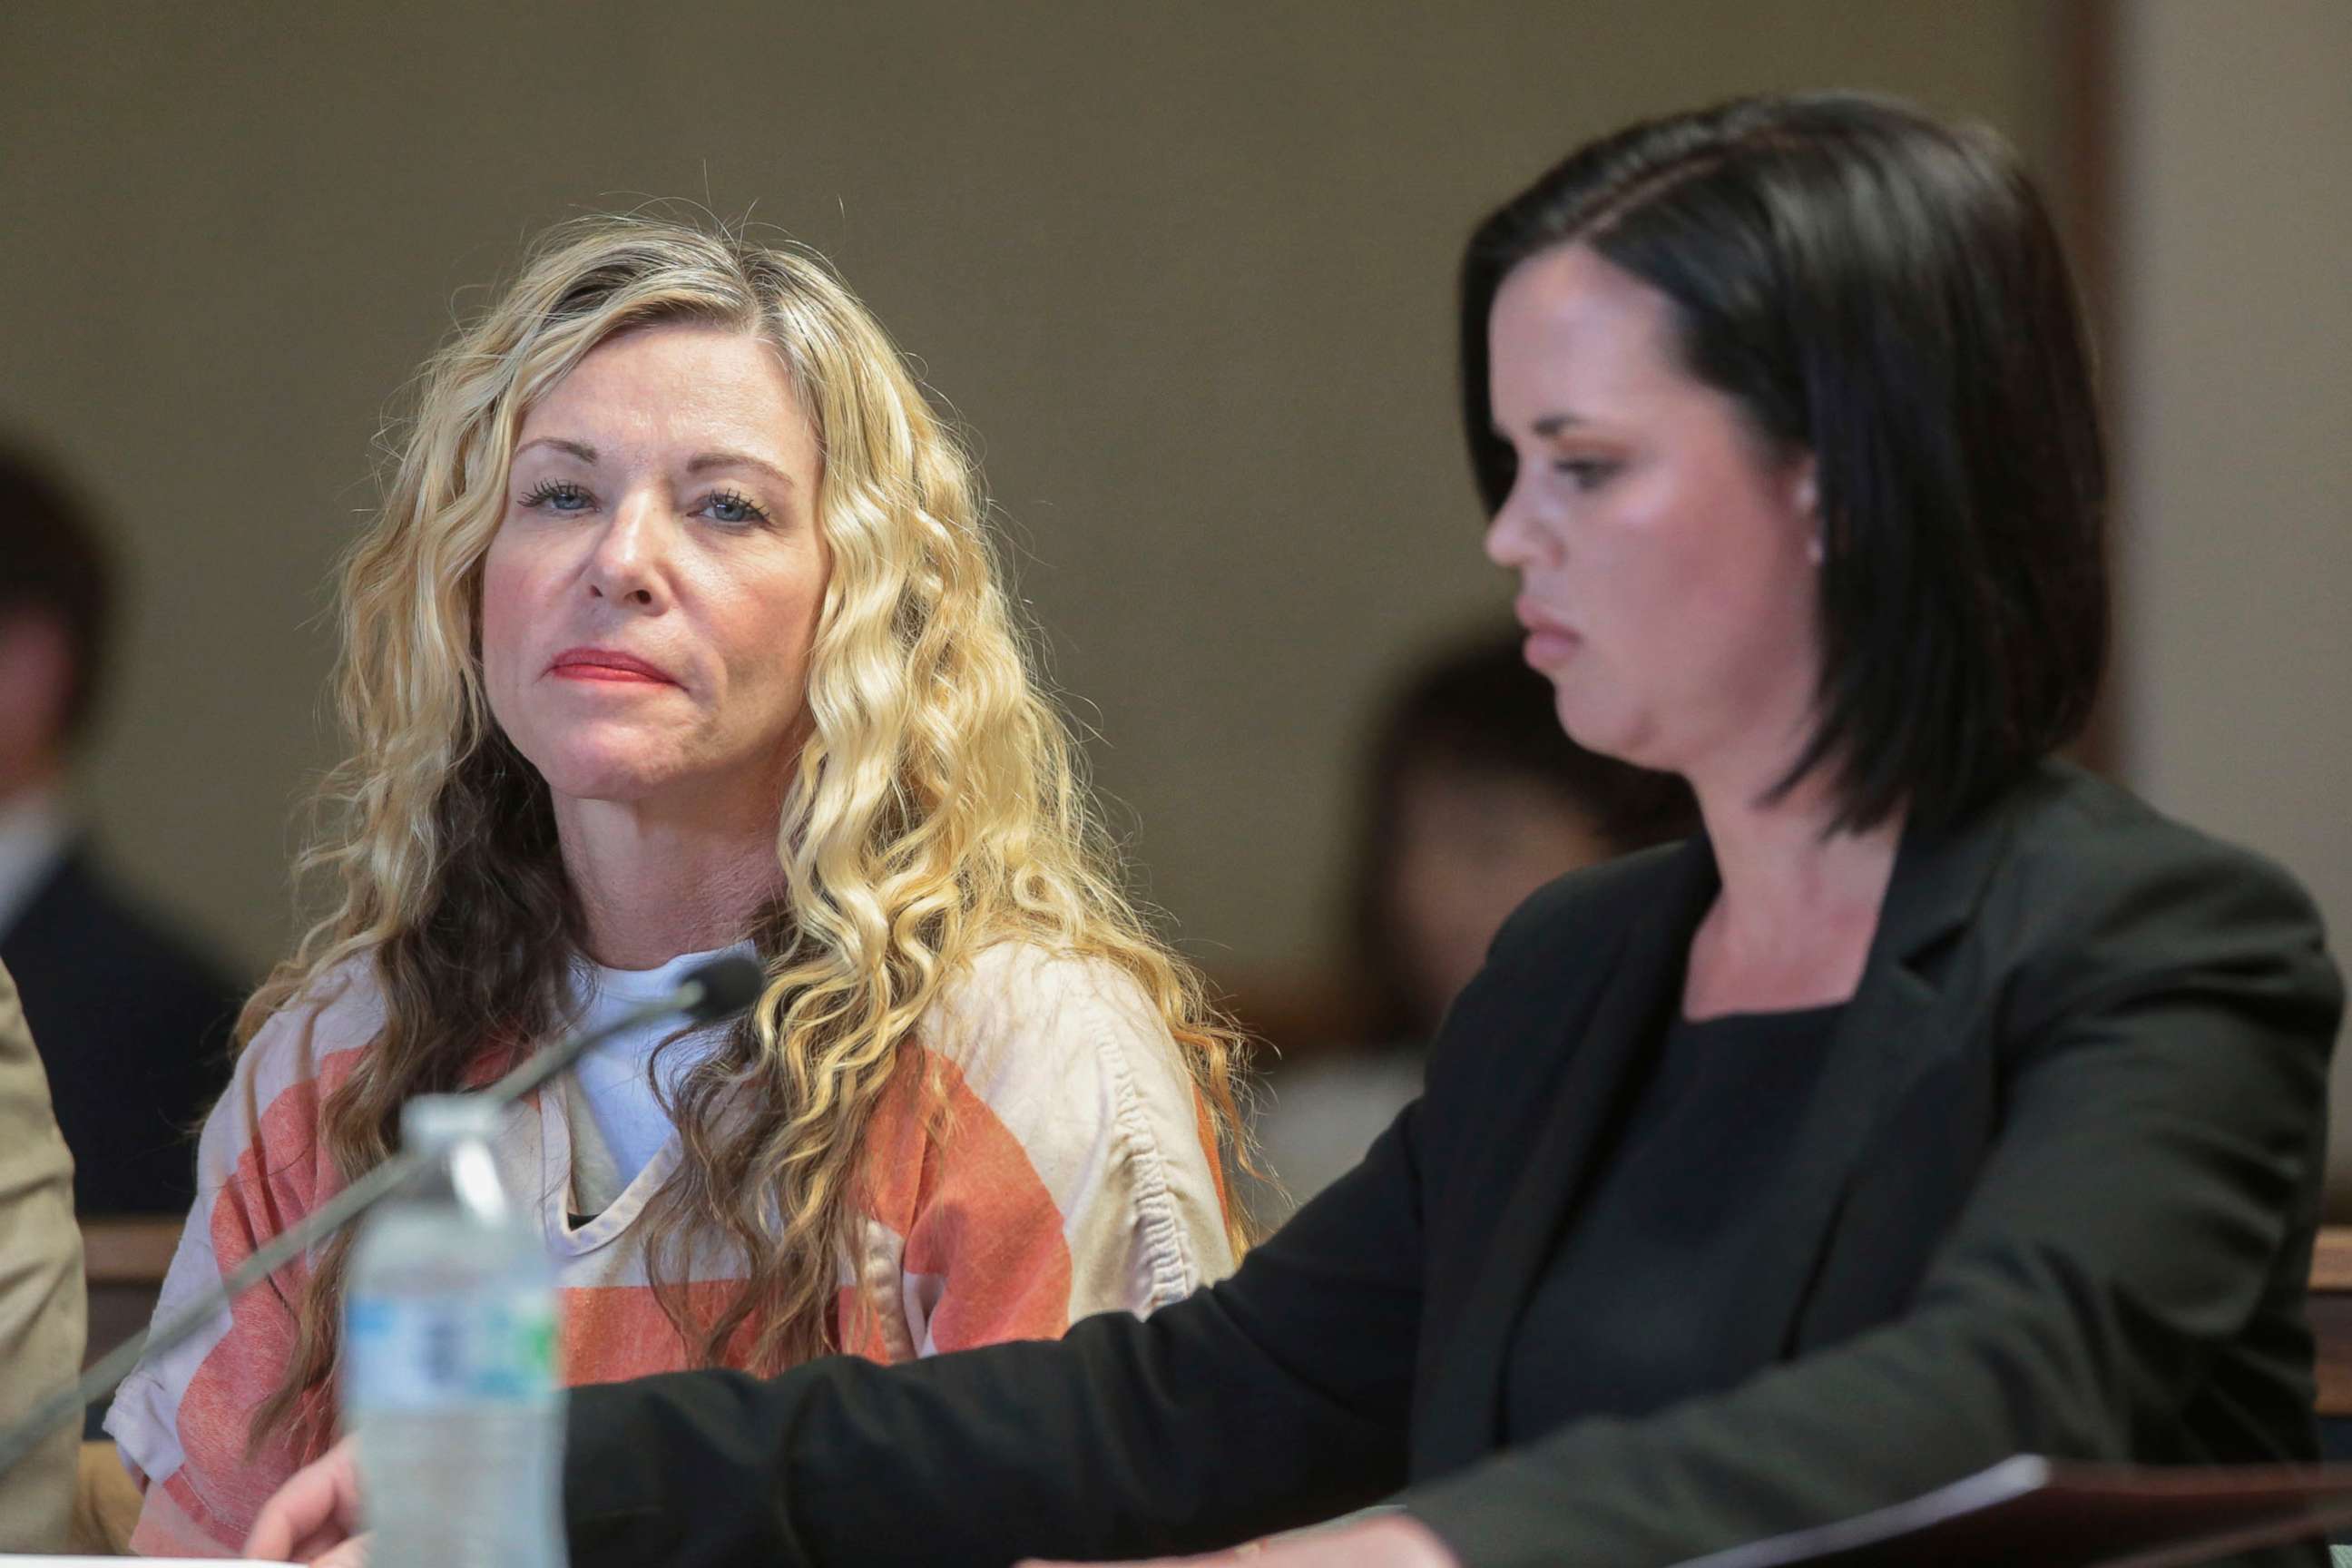 PHOTO: Lori Vallow Daybell during her hearing on March 6, 2020, in Rexburg, Idaho.